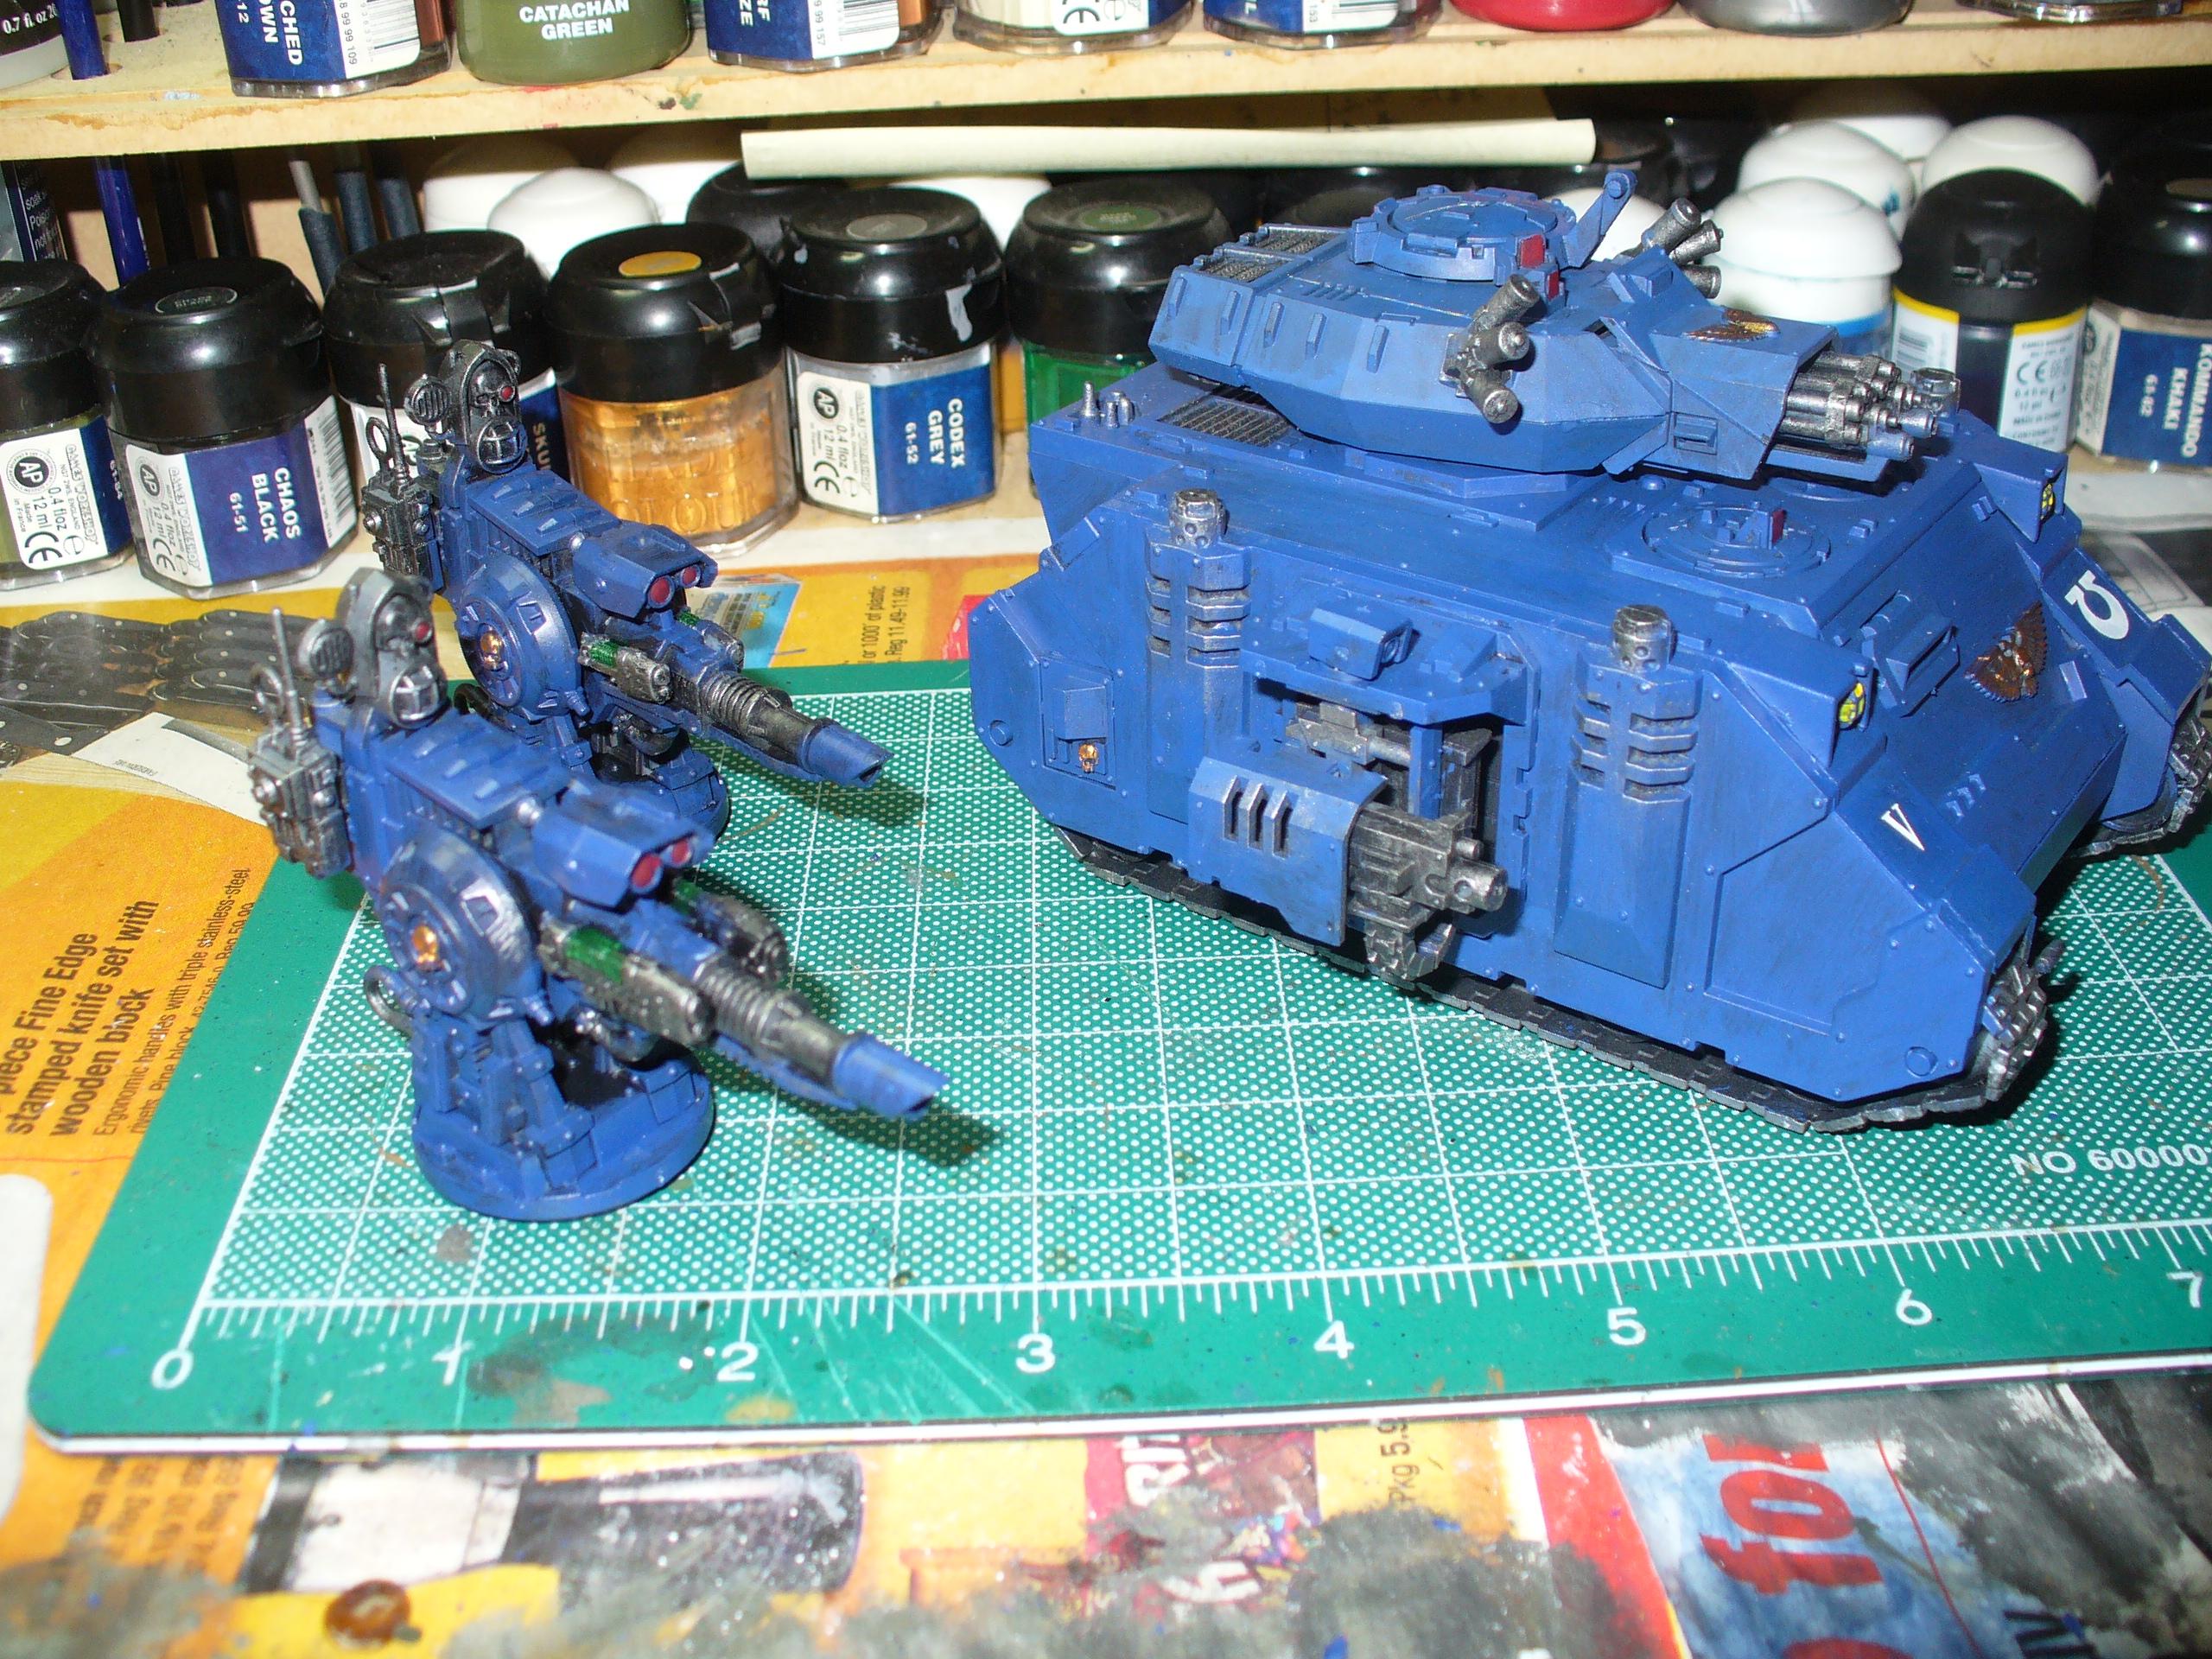 Other side, I used the Icarus Lascannon turret from the Imperial Strongpoint as they were just sitting around and they fit in the vehicles nicely